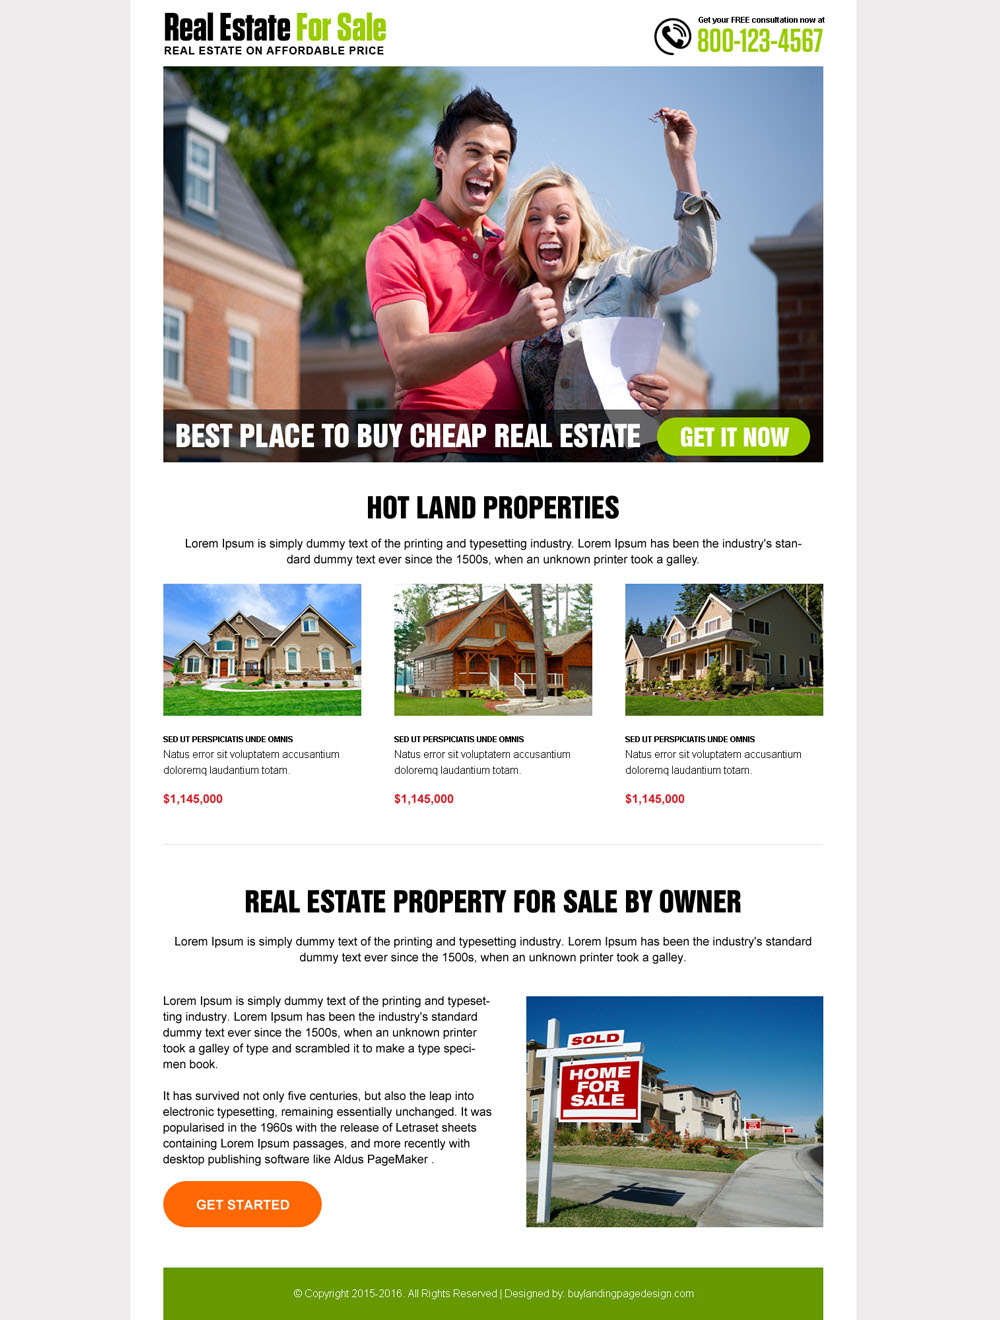 best-real-estate-for-sale-high-converting-landing-page-templates-017